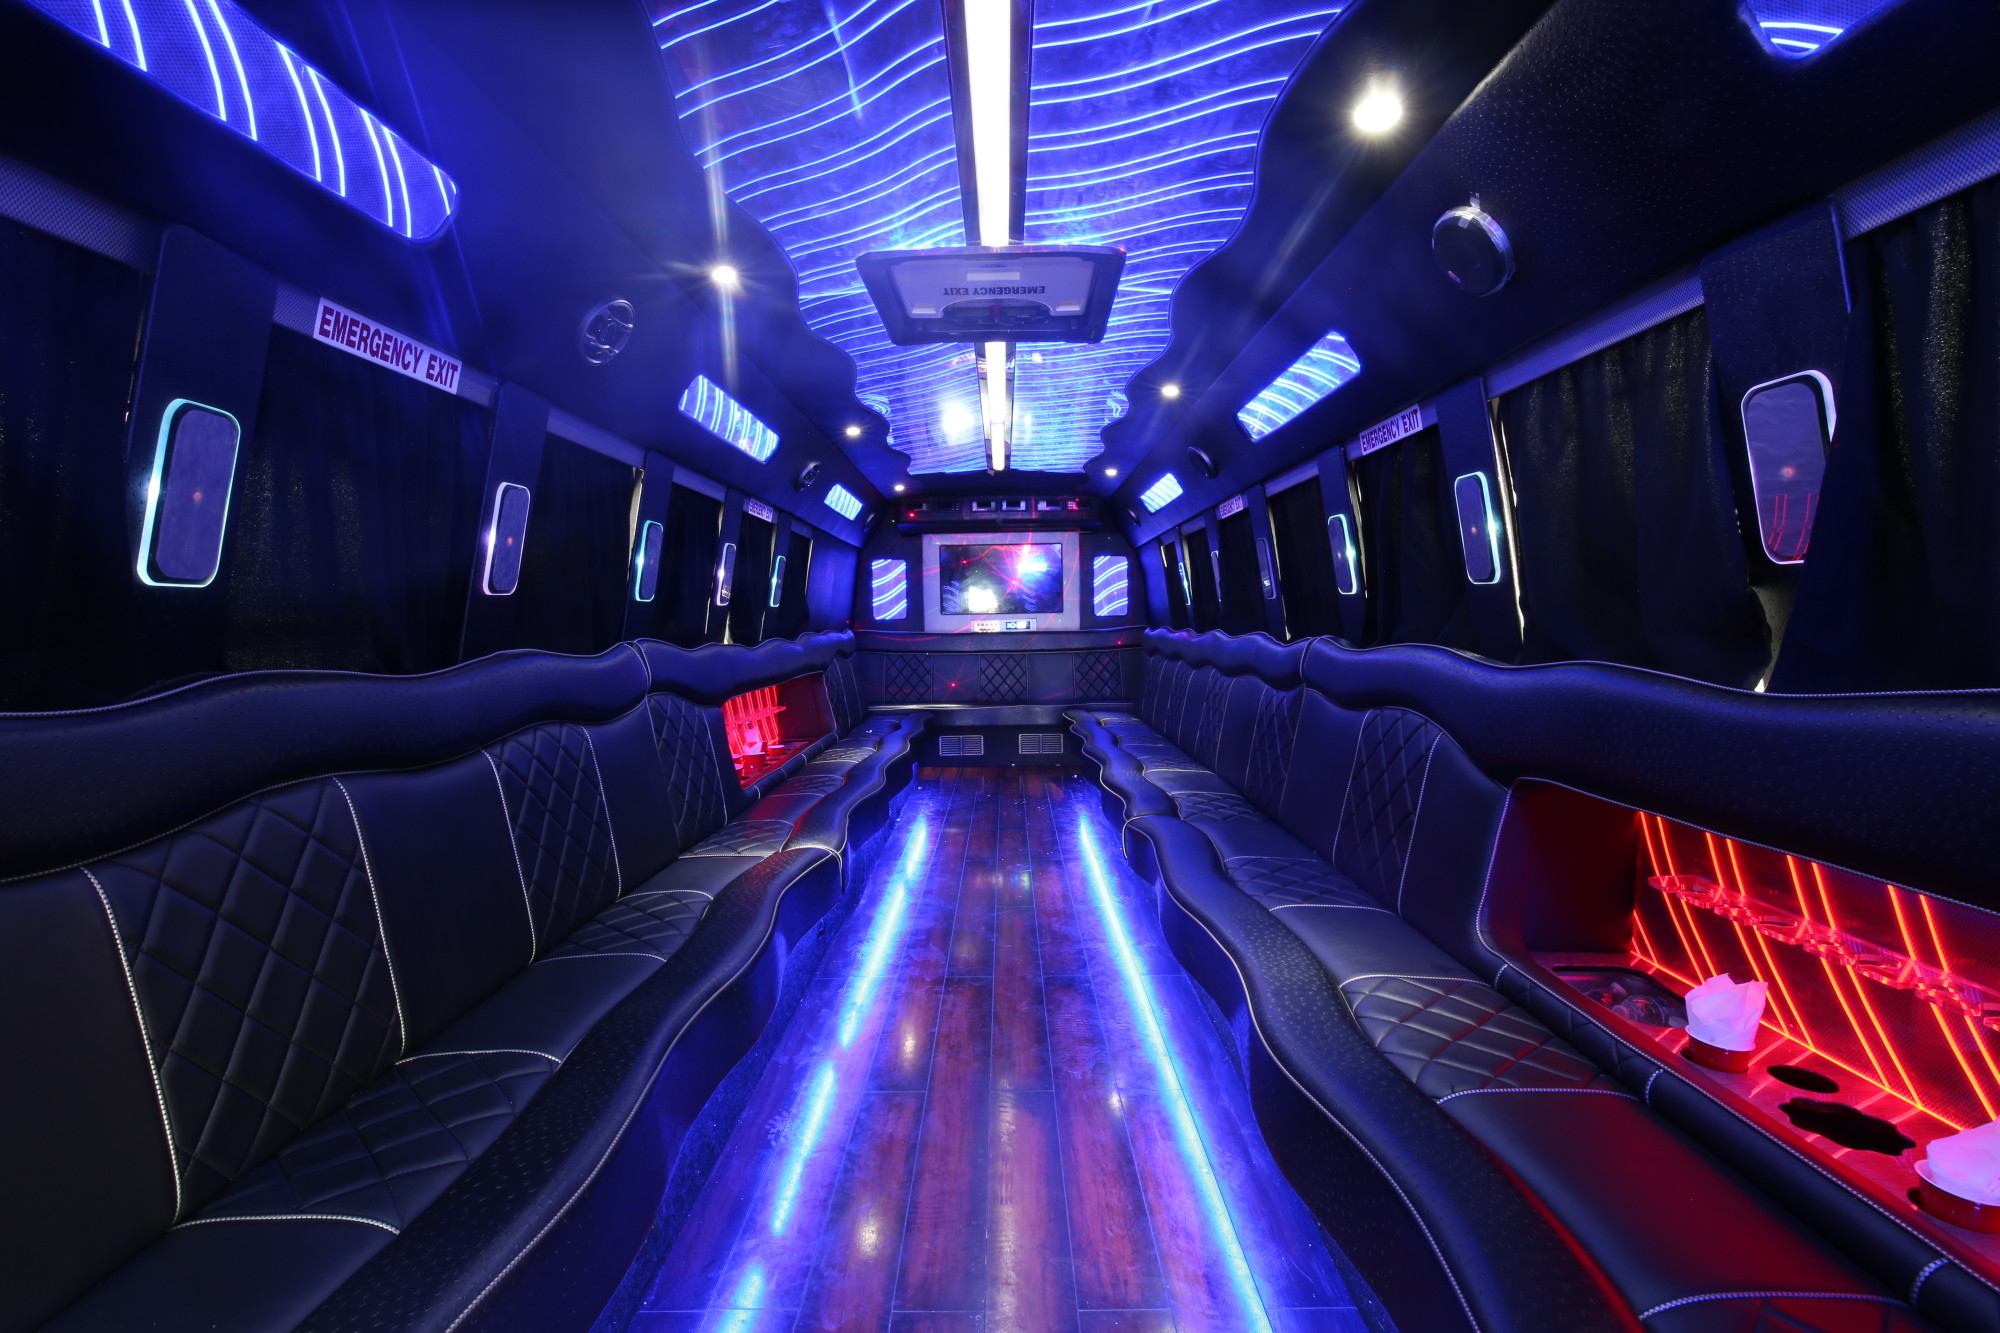 On A Party Bus, What Kinds Of Parties And Activities Can You Have?